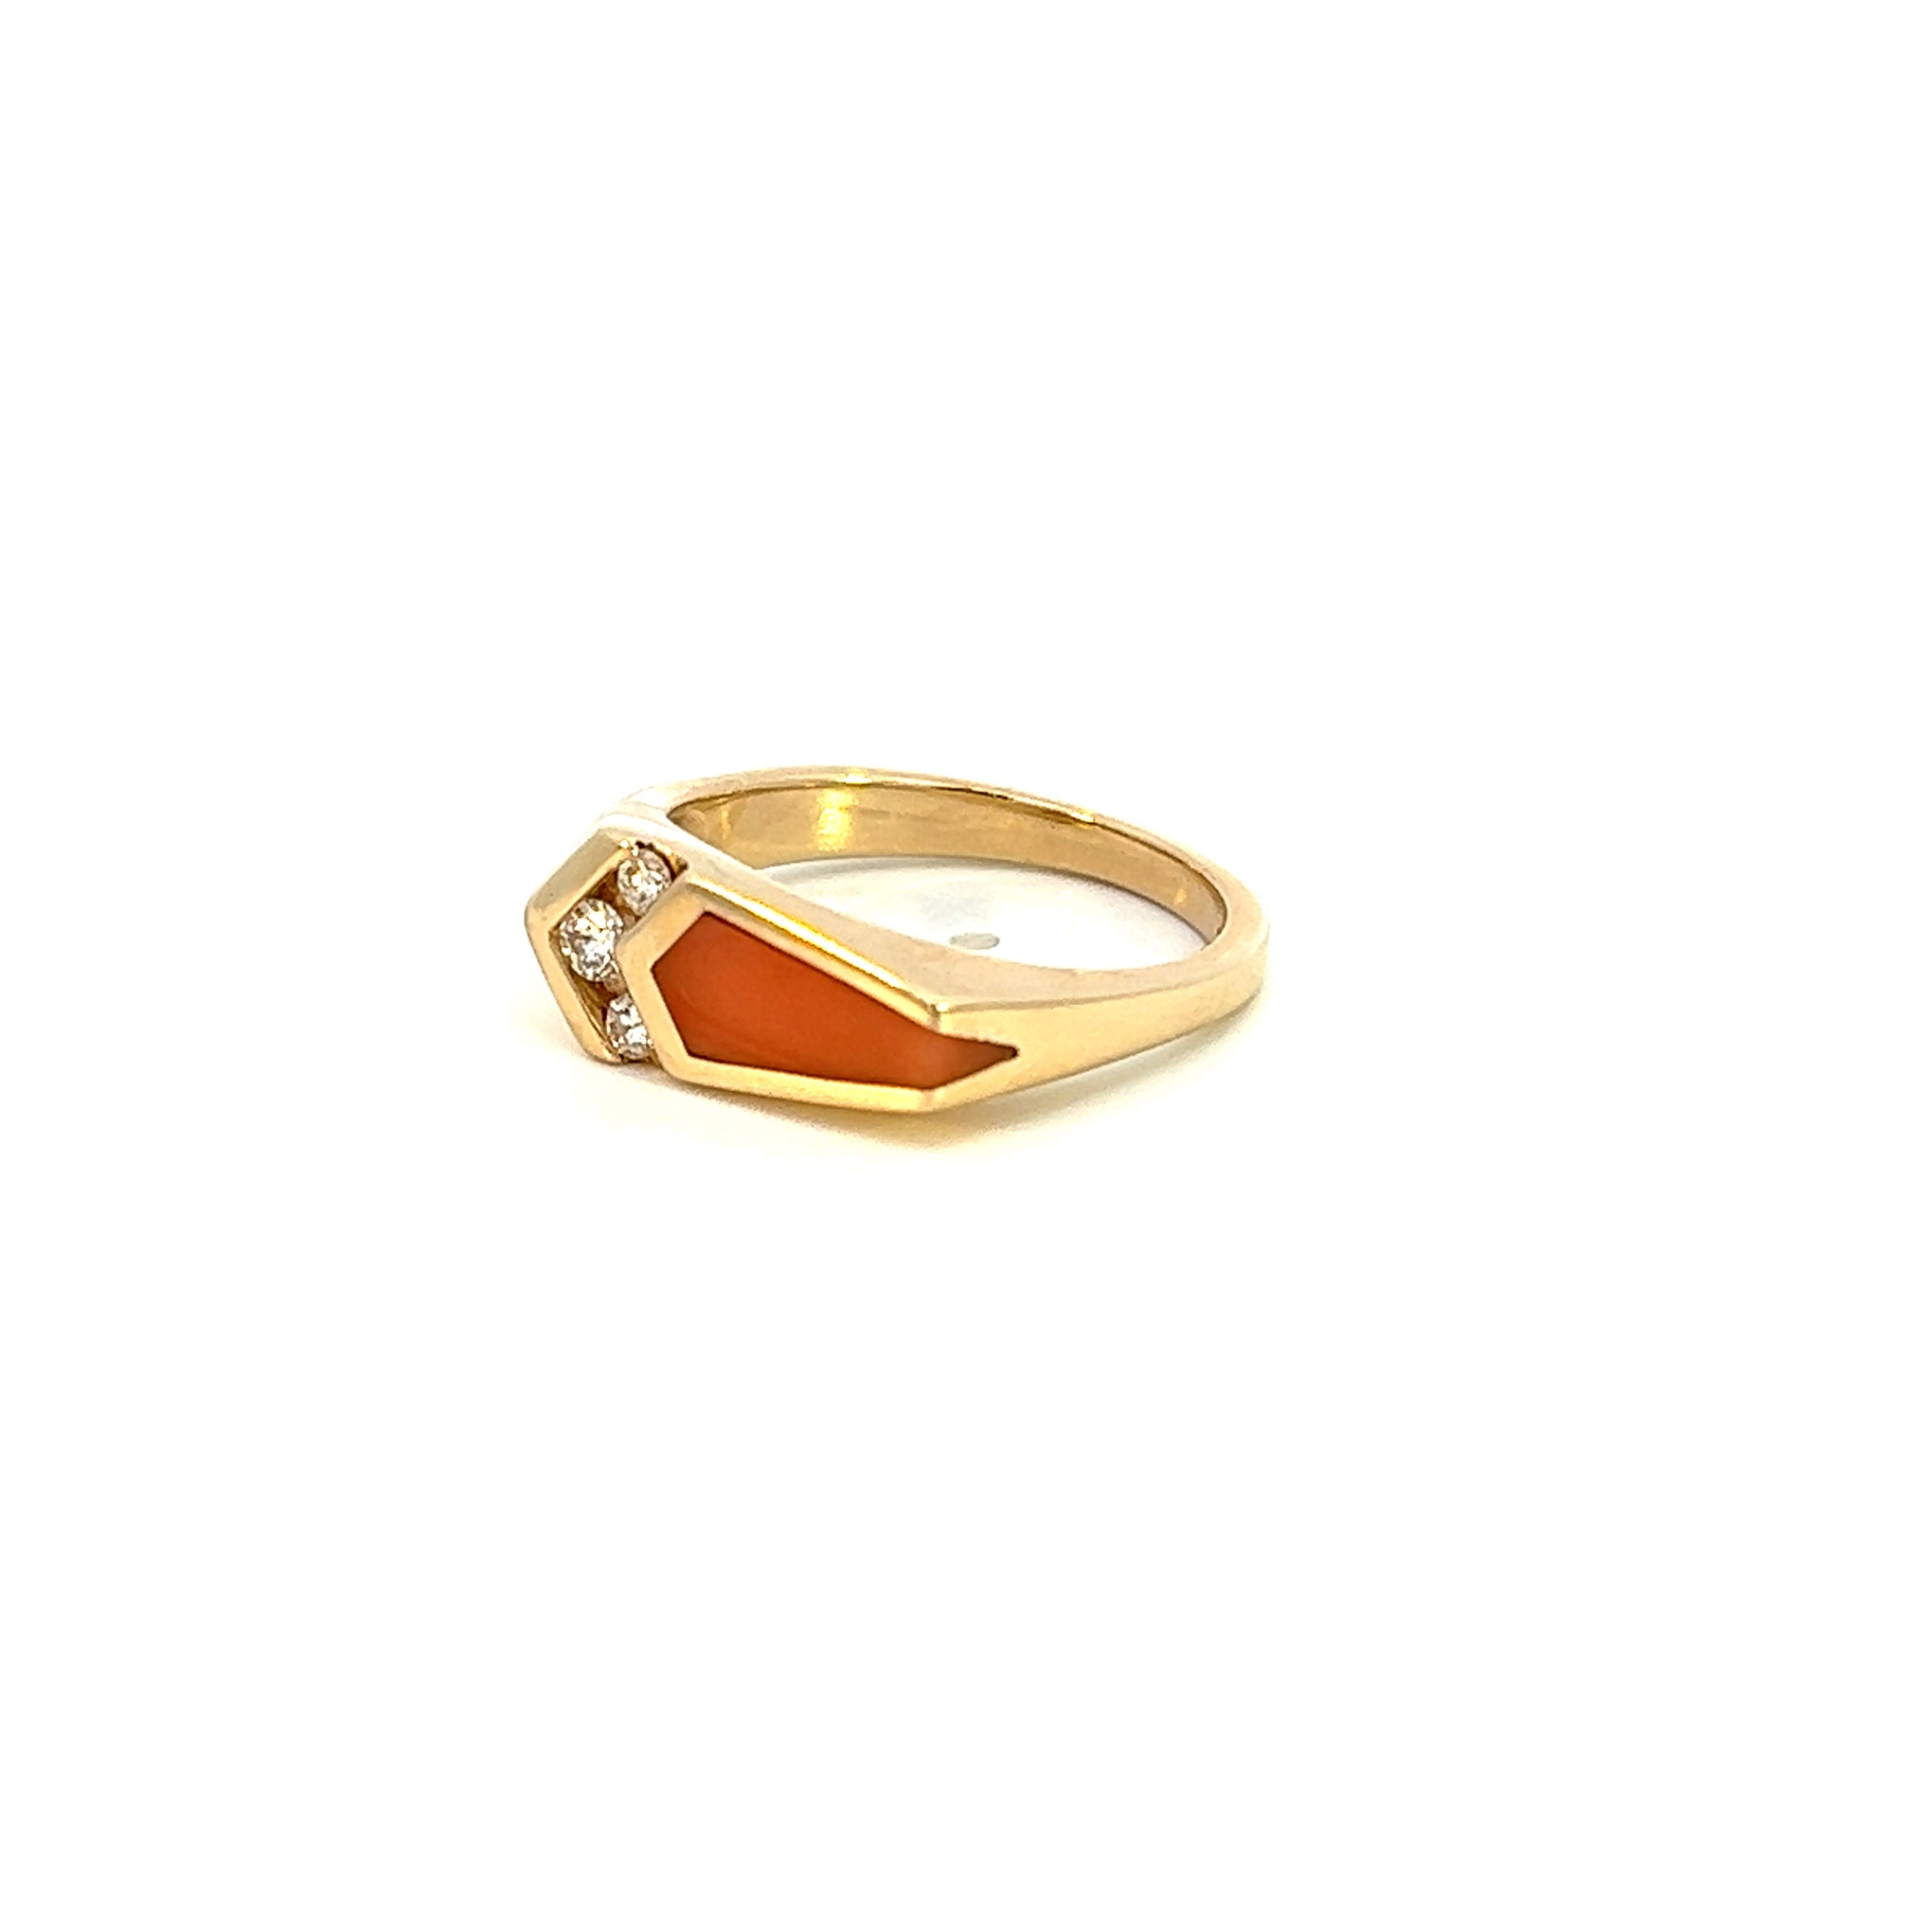 ESTATE 14KT YELLOW GOLD ROUND CUT CORAL DIAMOND RING